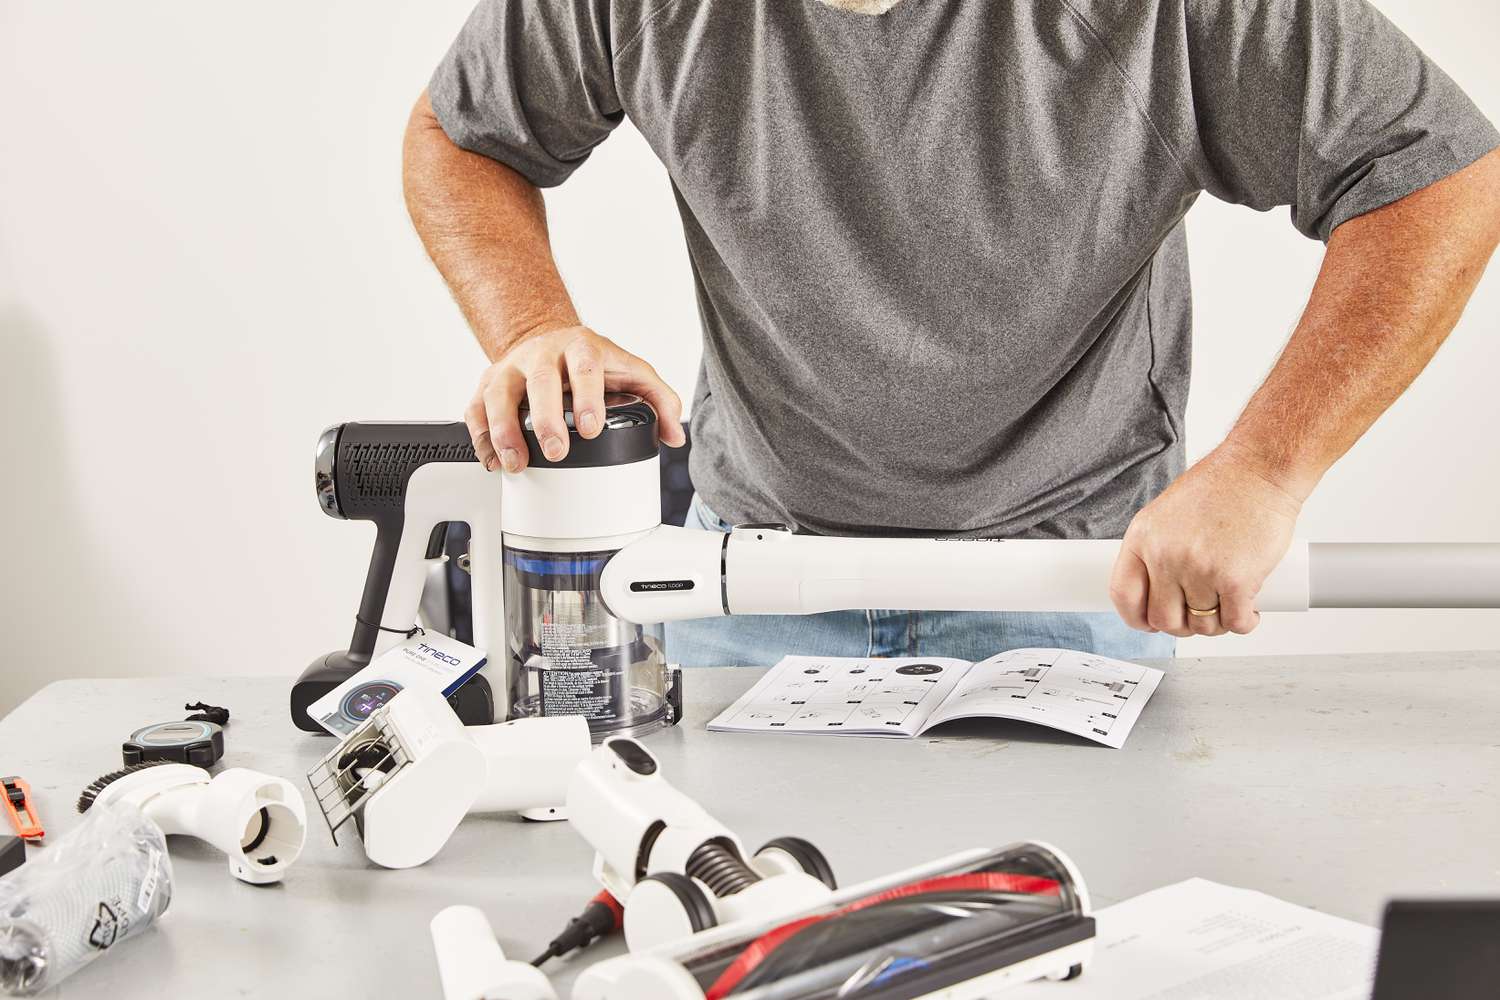 Person assembling the Tineco Pure One S15 Pro Cordless Stick Vacuum Cleaner on a table during product testing